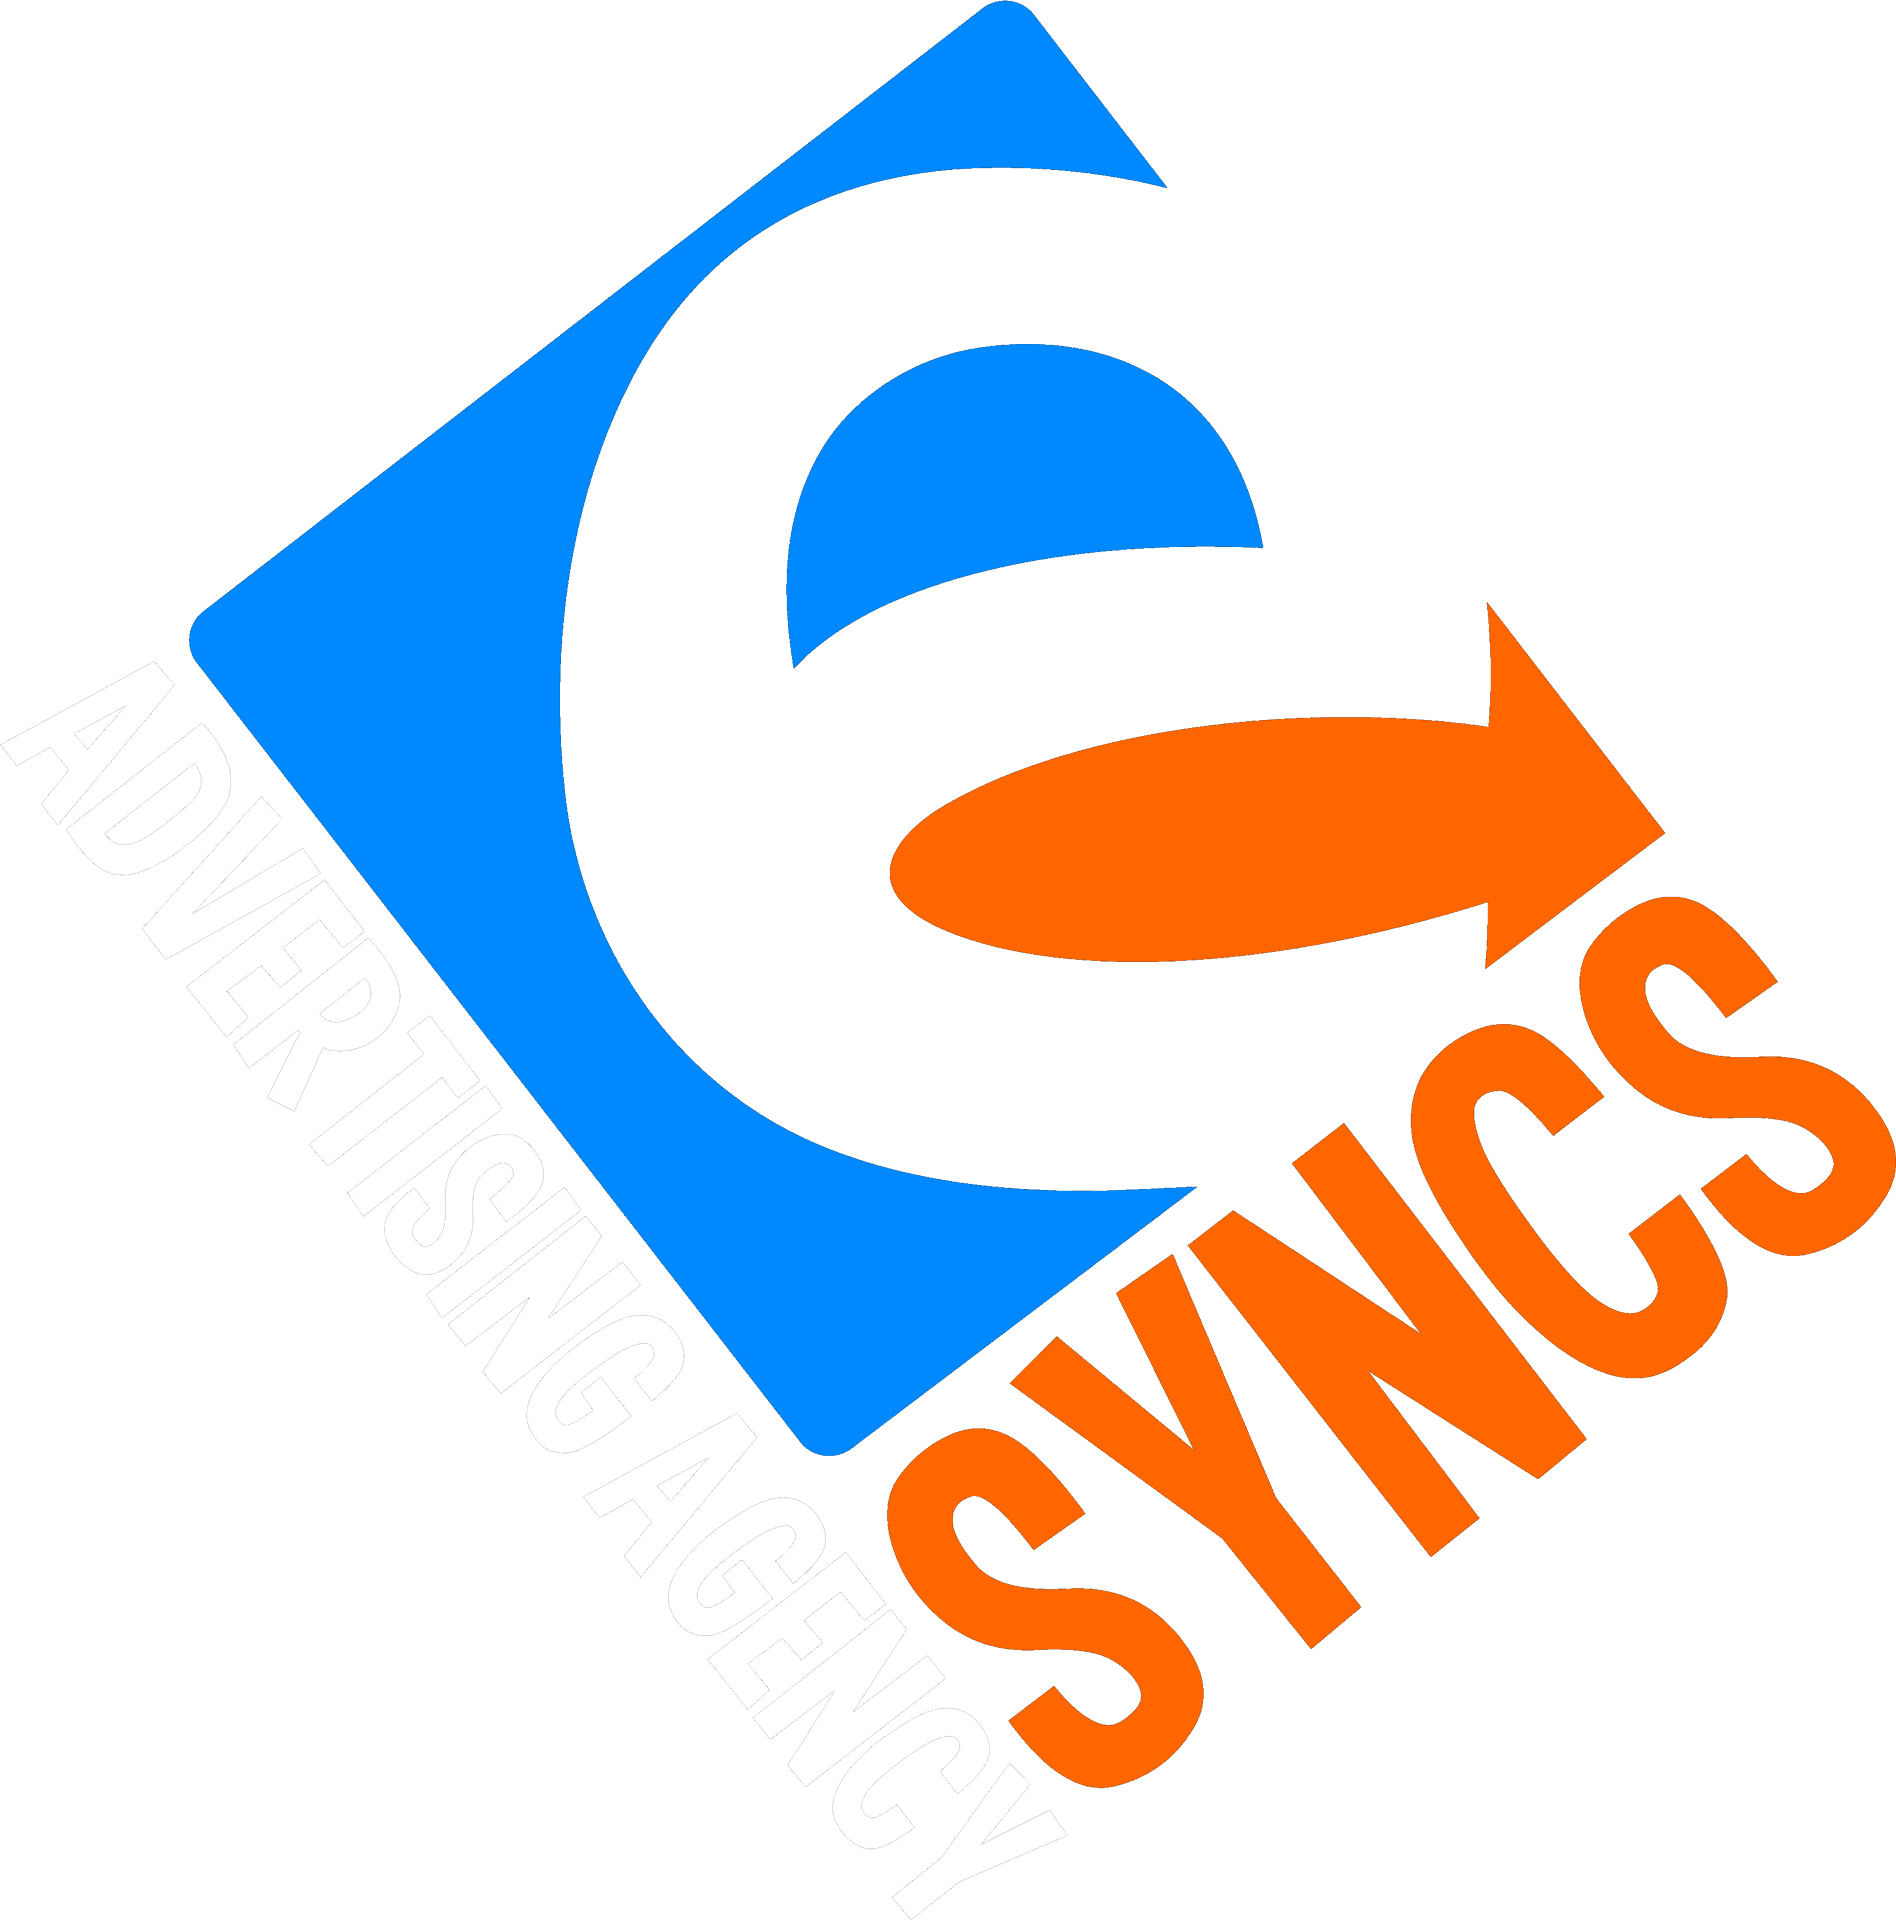 Advertising Agency Syncs Logo PNG image